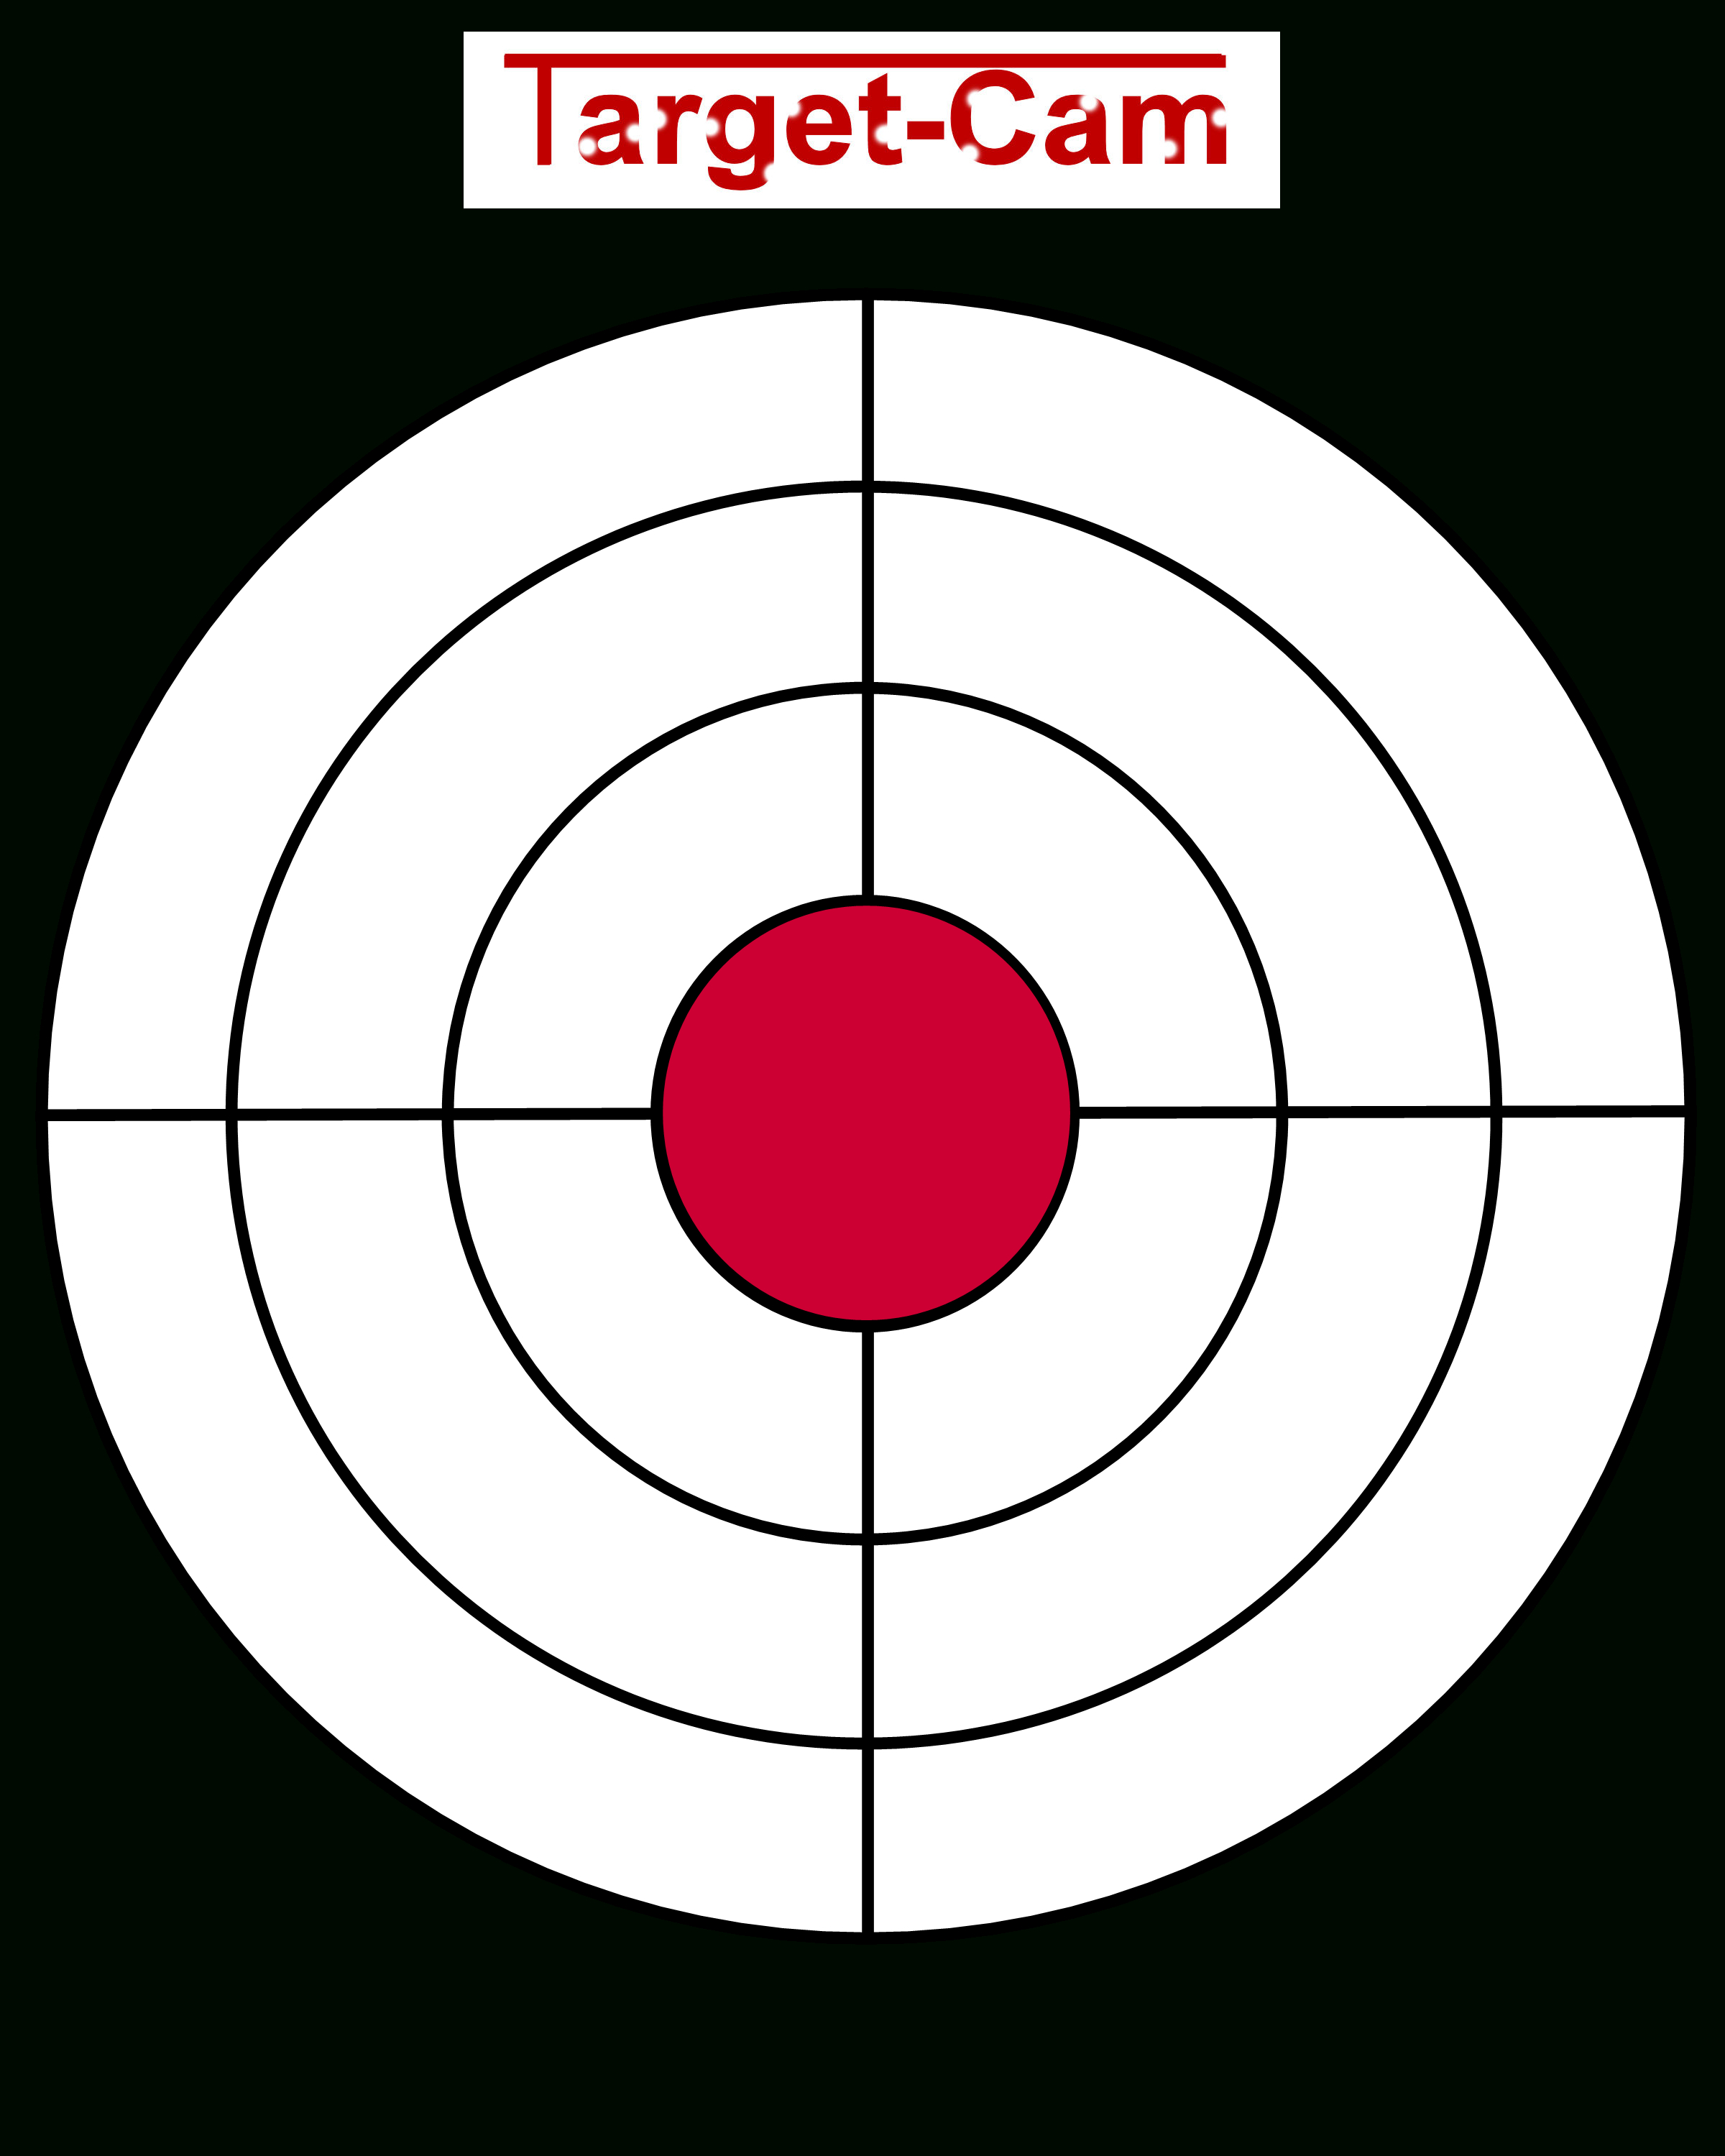 Free Gun Targets To Print | New &amp;quot;target-Cam&amp;quot; Rifle And Hand Gun - Free Printable Shooting Targets